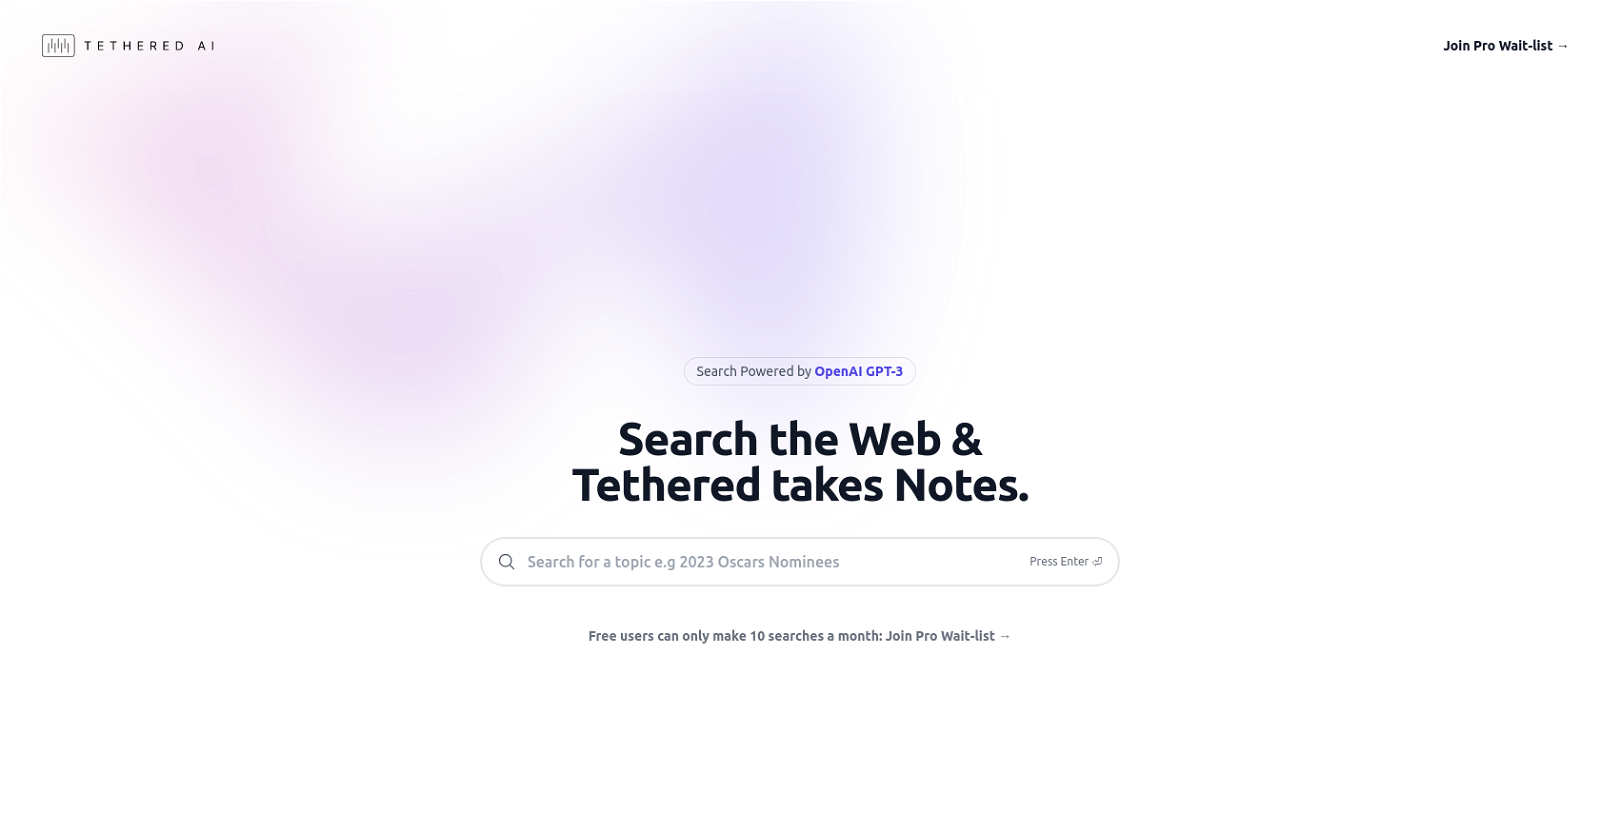 Tethered AI website